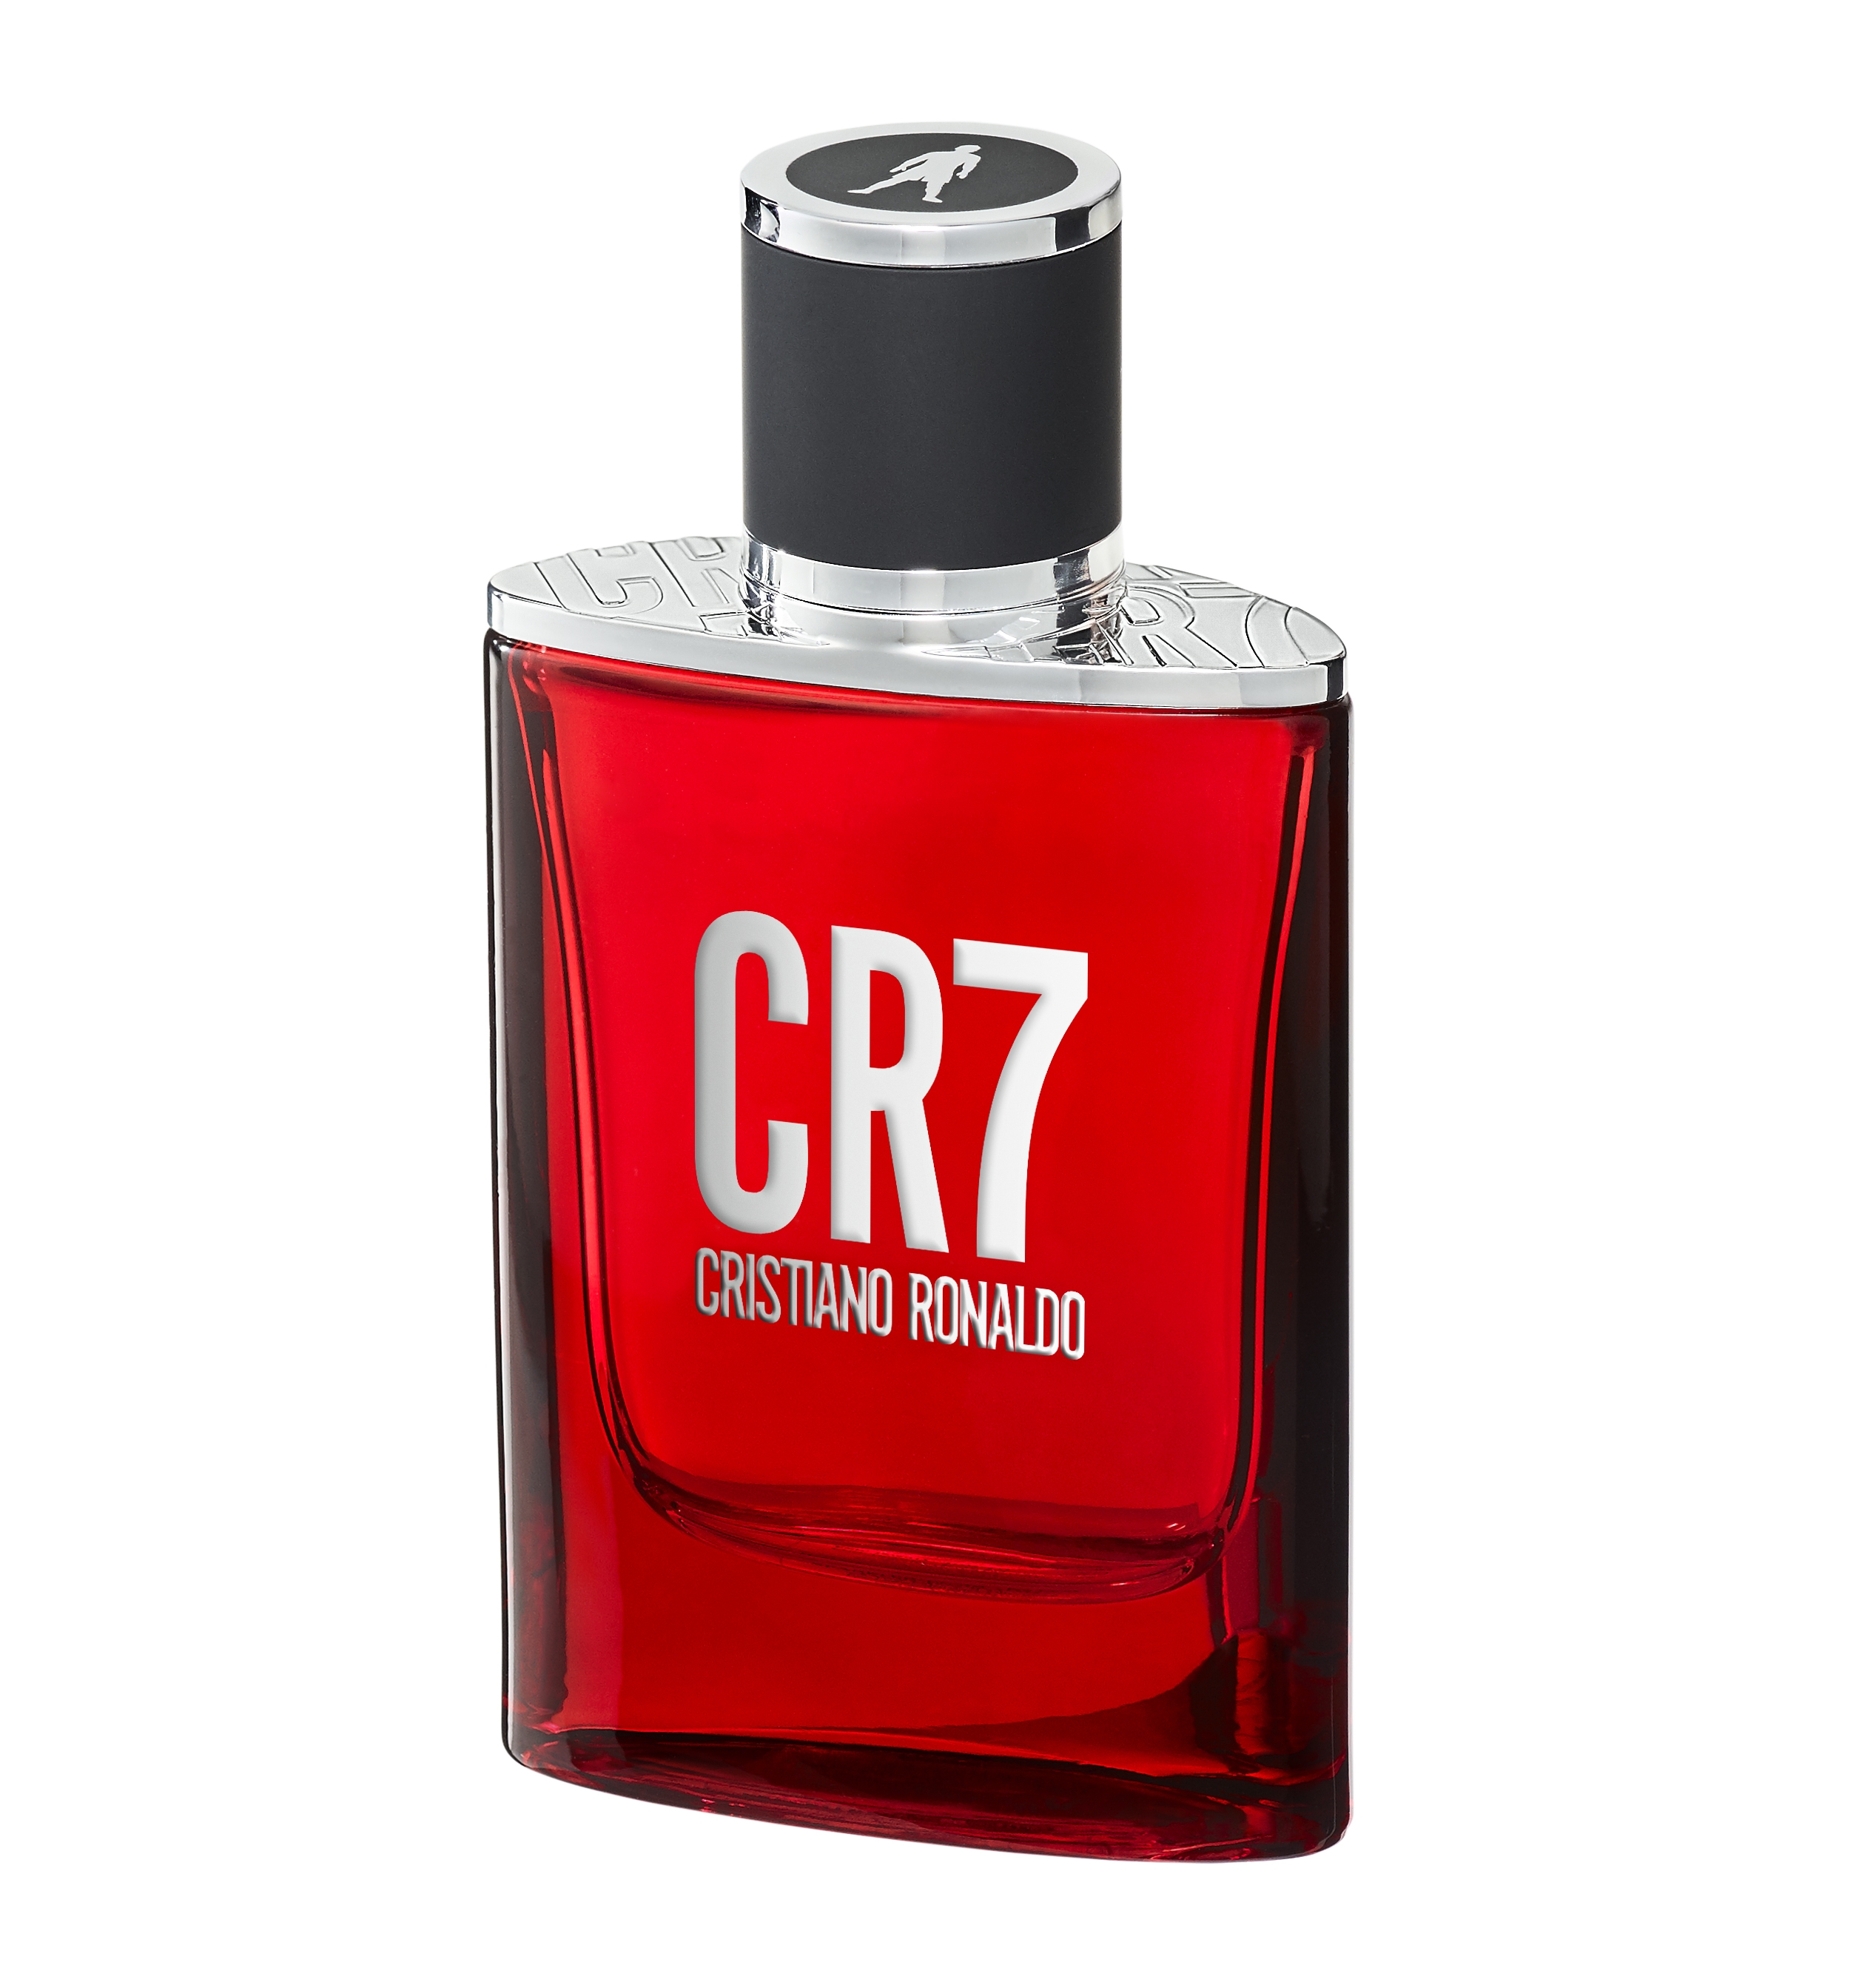 https://avvenice.com/72088/cr7-cristiano-ronaldo-the-brand-new-fragrance-red-passion-exclusive-collection-luxury-fragrance-30-ml.jpg